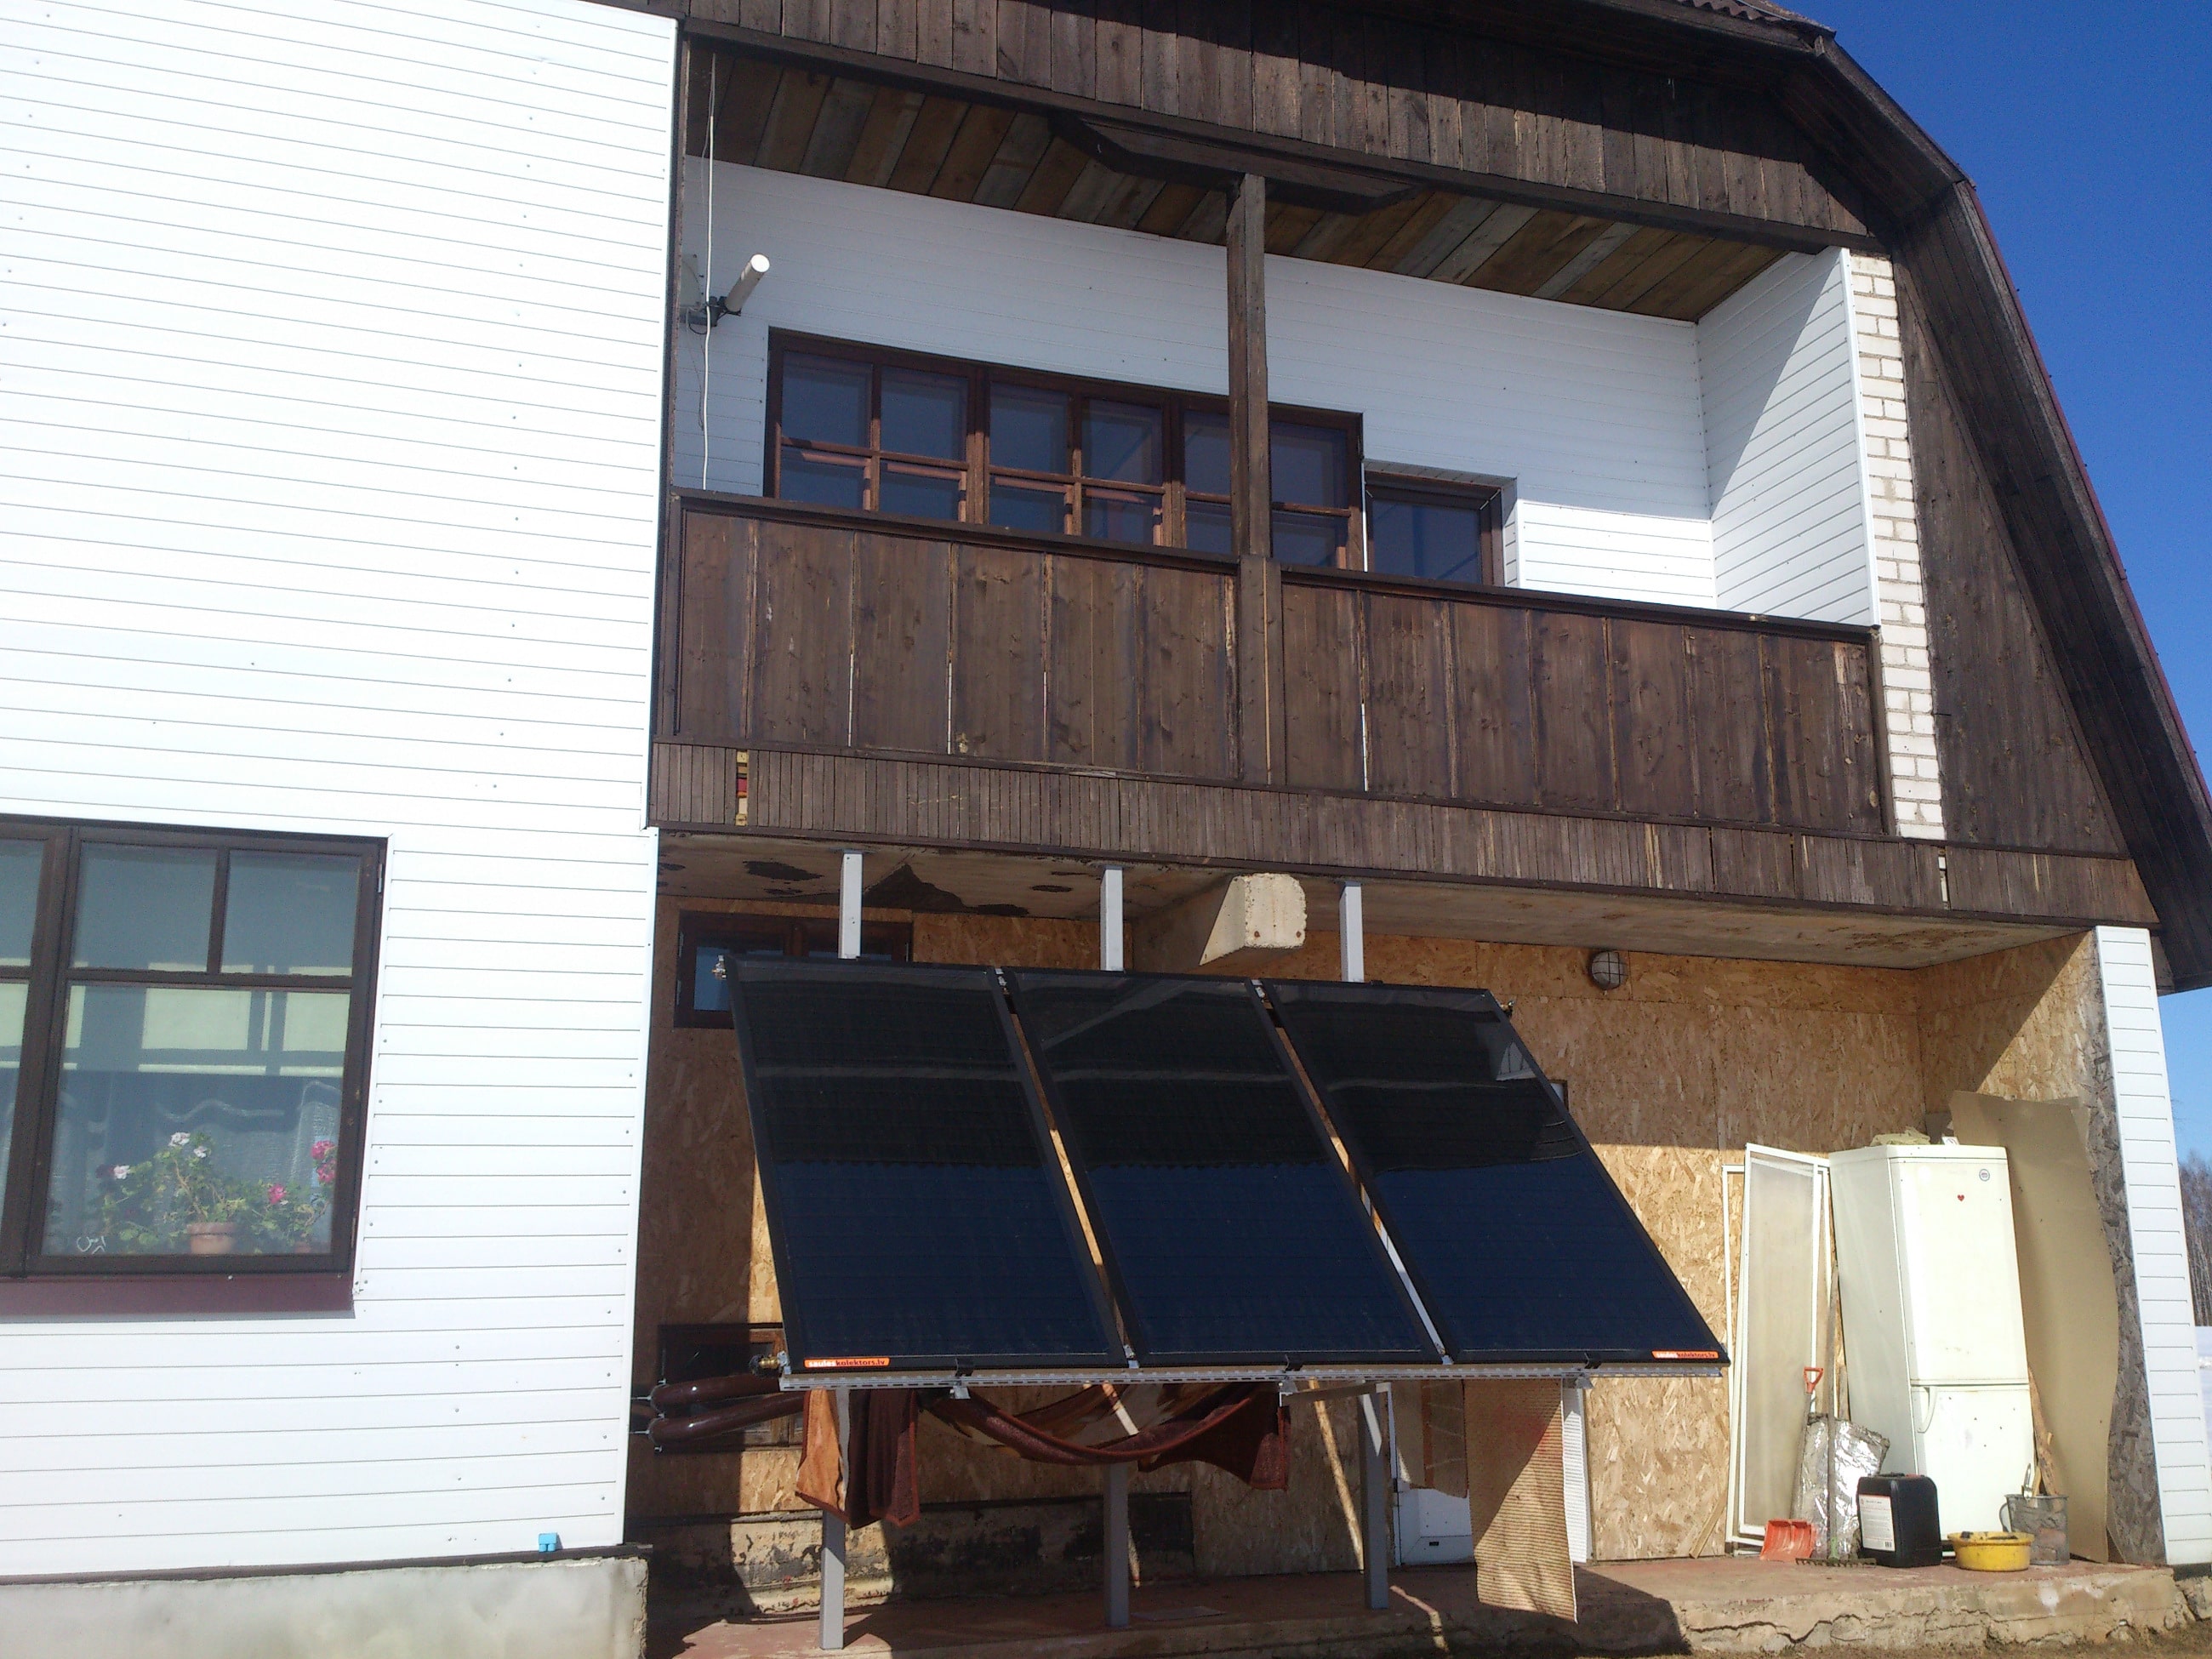 Solar collector system for hot water supply in Barbele